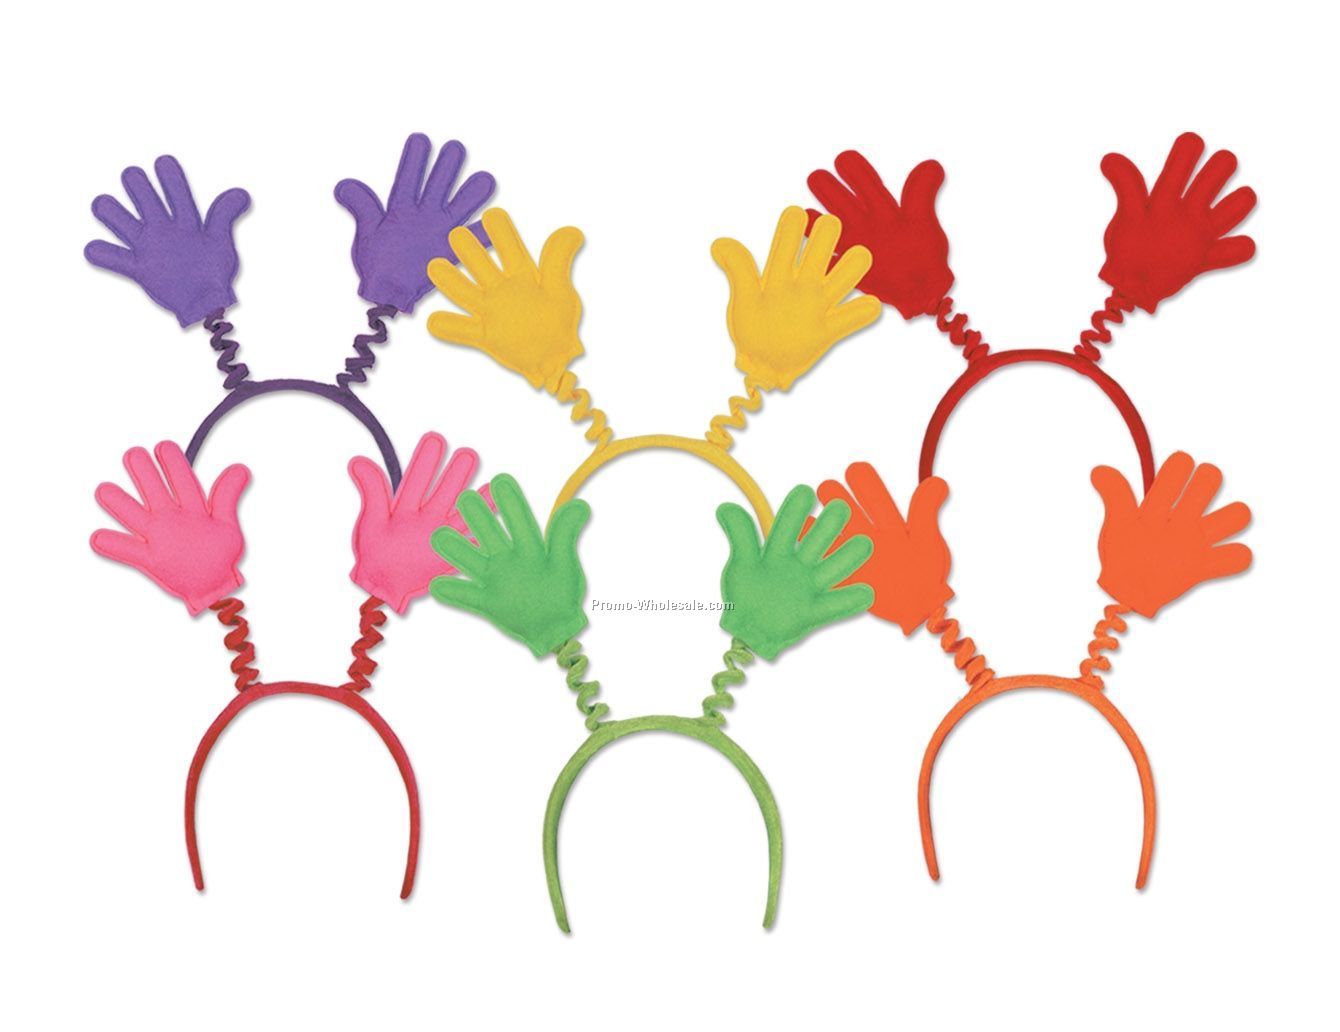 Soft-touch Hi Five Party Boppers